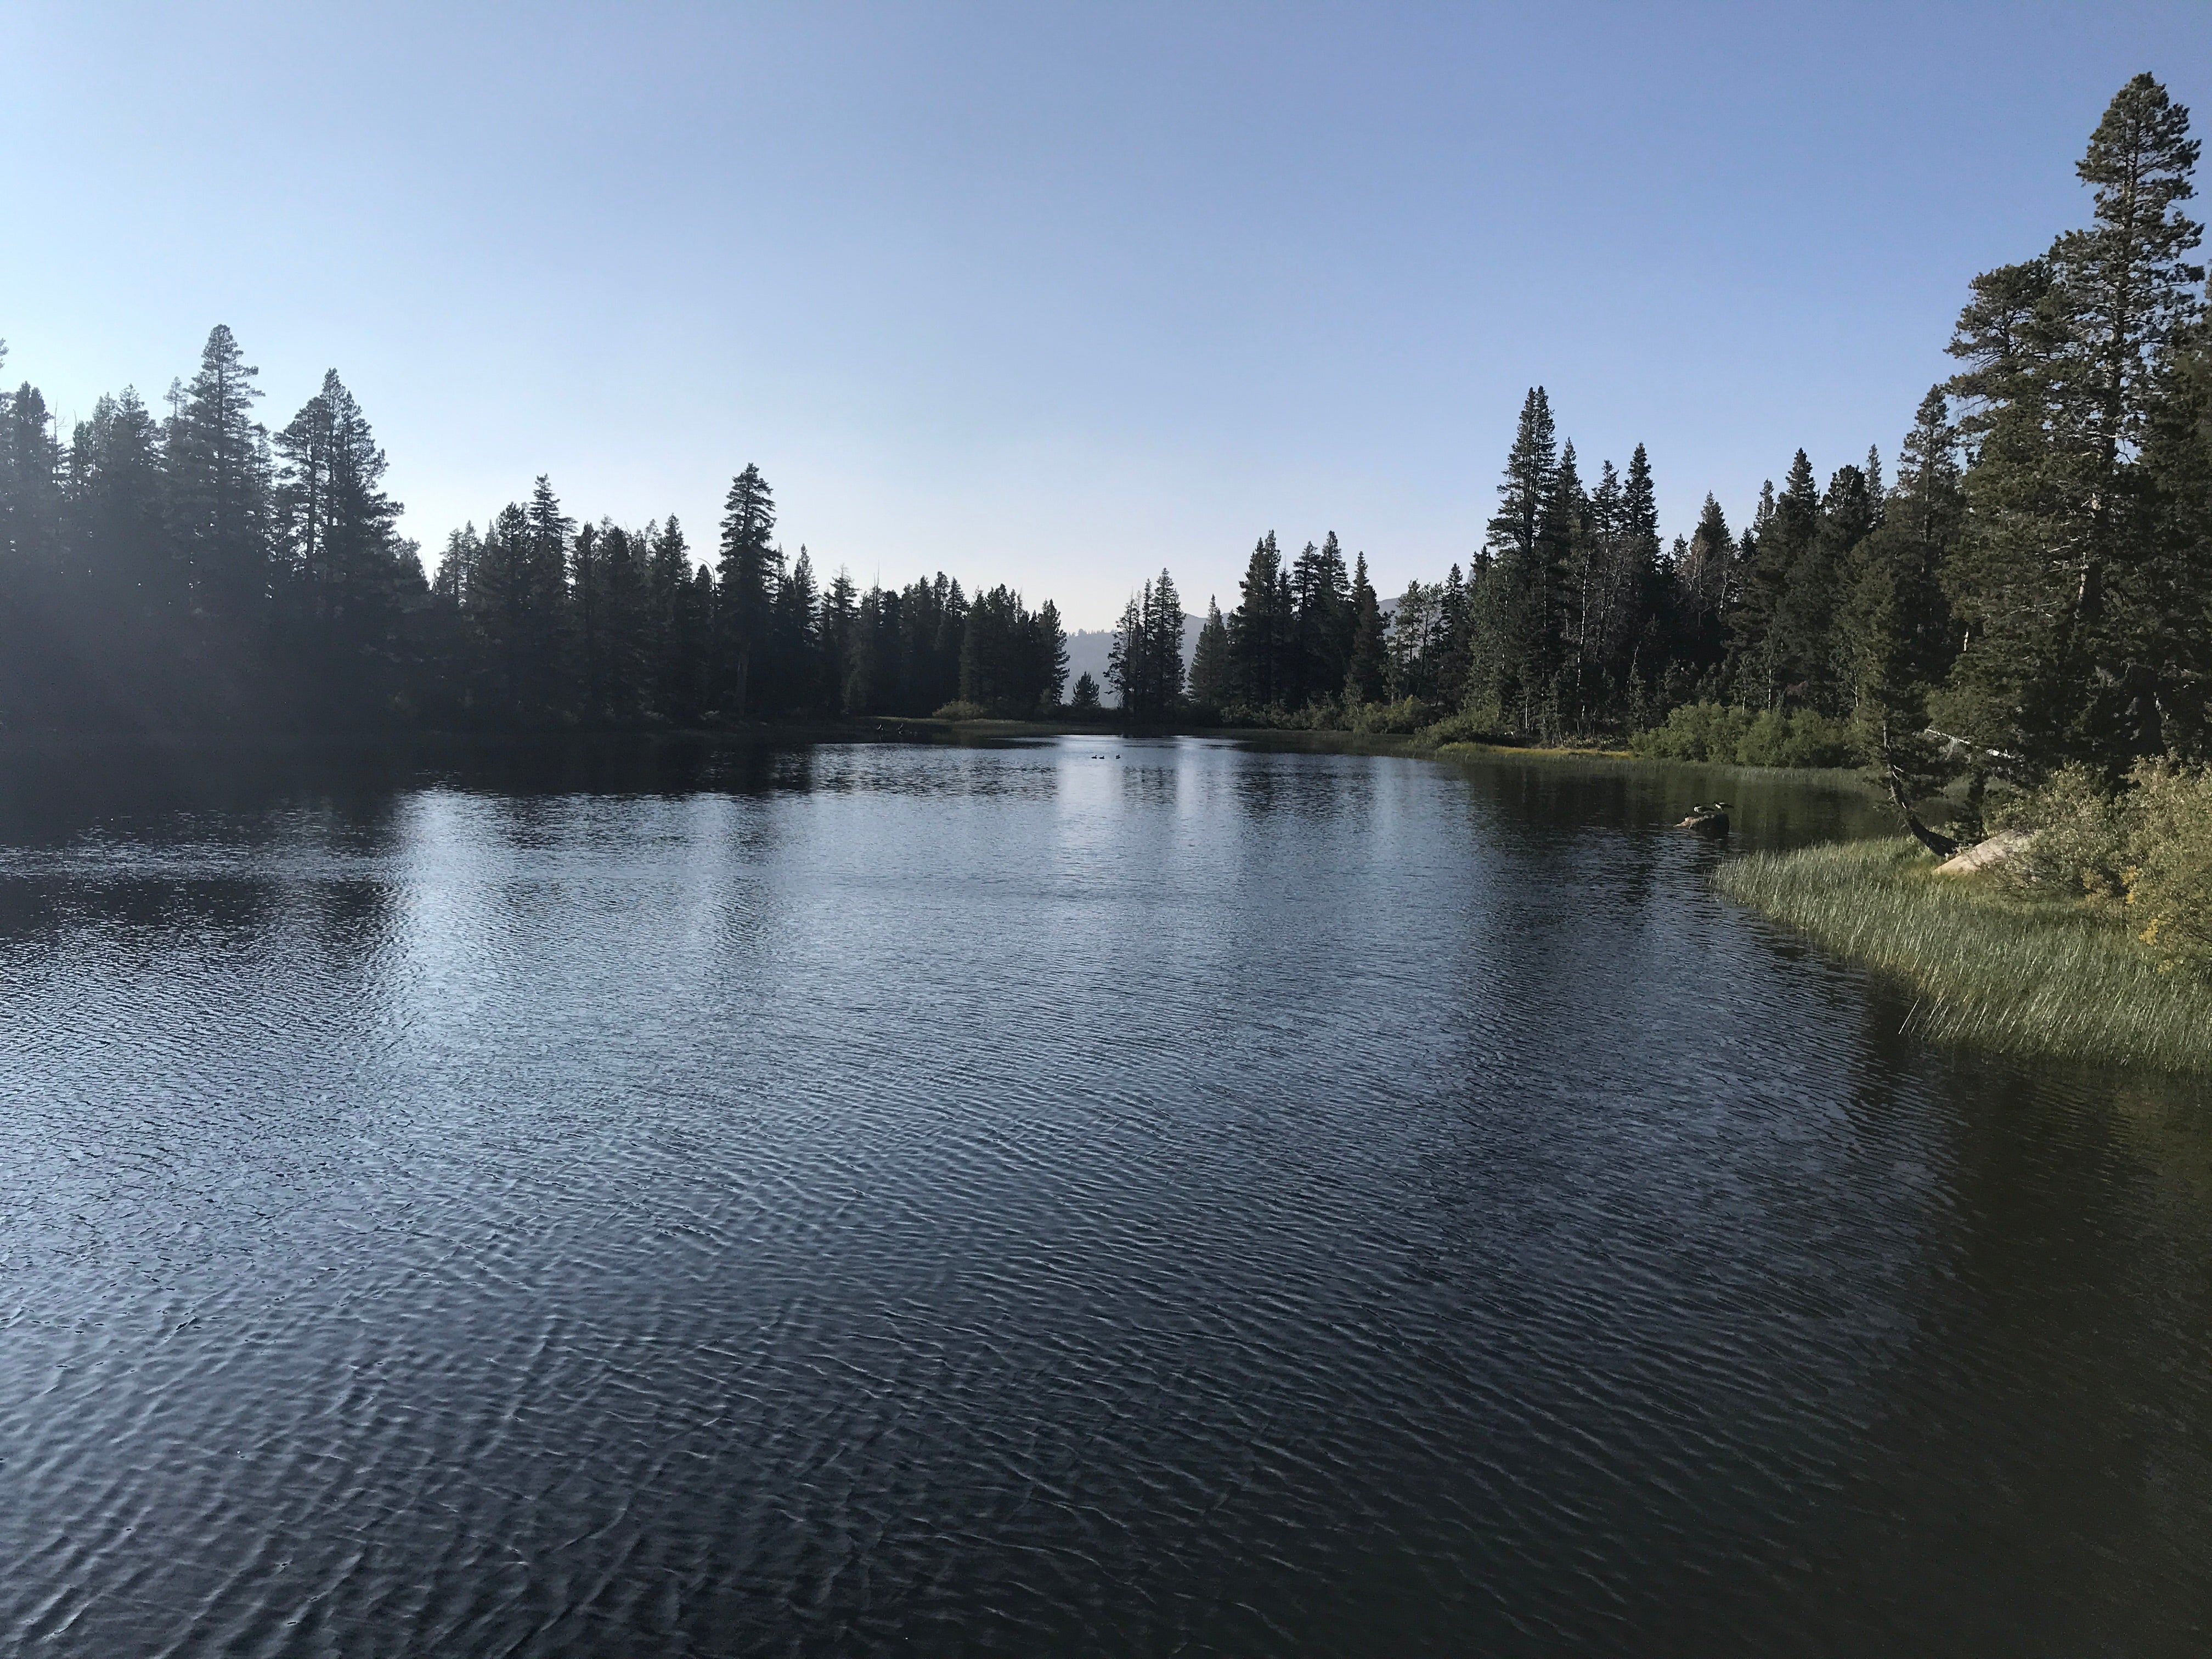 Camper submitted image from Wet Meadows Reservoir - 3